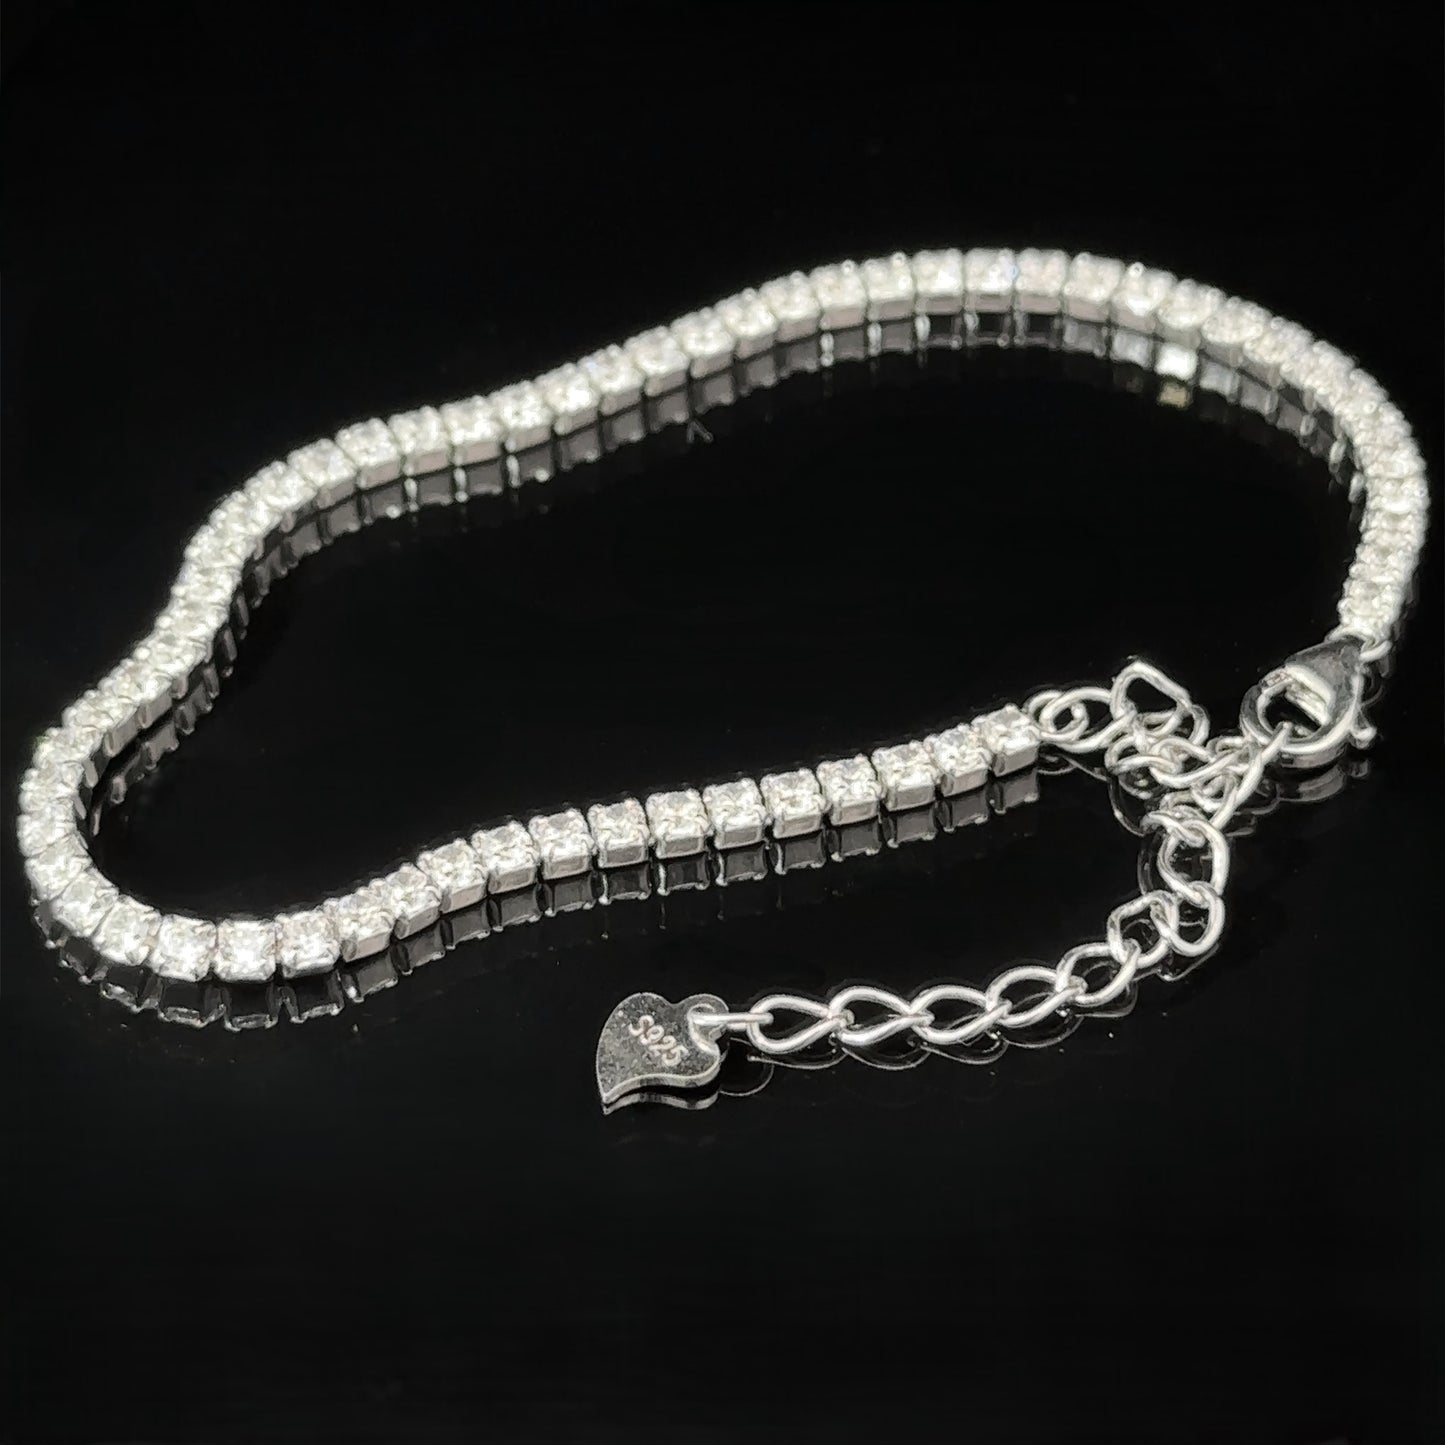 
                  
                    A Square Cubic Zirconia Tennis Bracelet featuring a row of square-cut cubic zirconia crystals and a heart-shaped charm on the rhodium-plated sterling silver chain, displayed against a black background.
                  
                